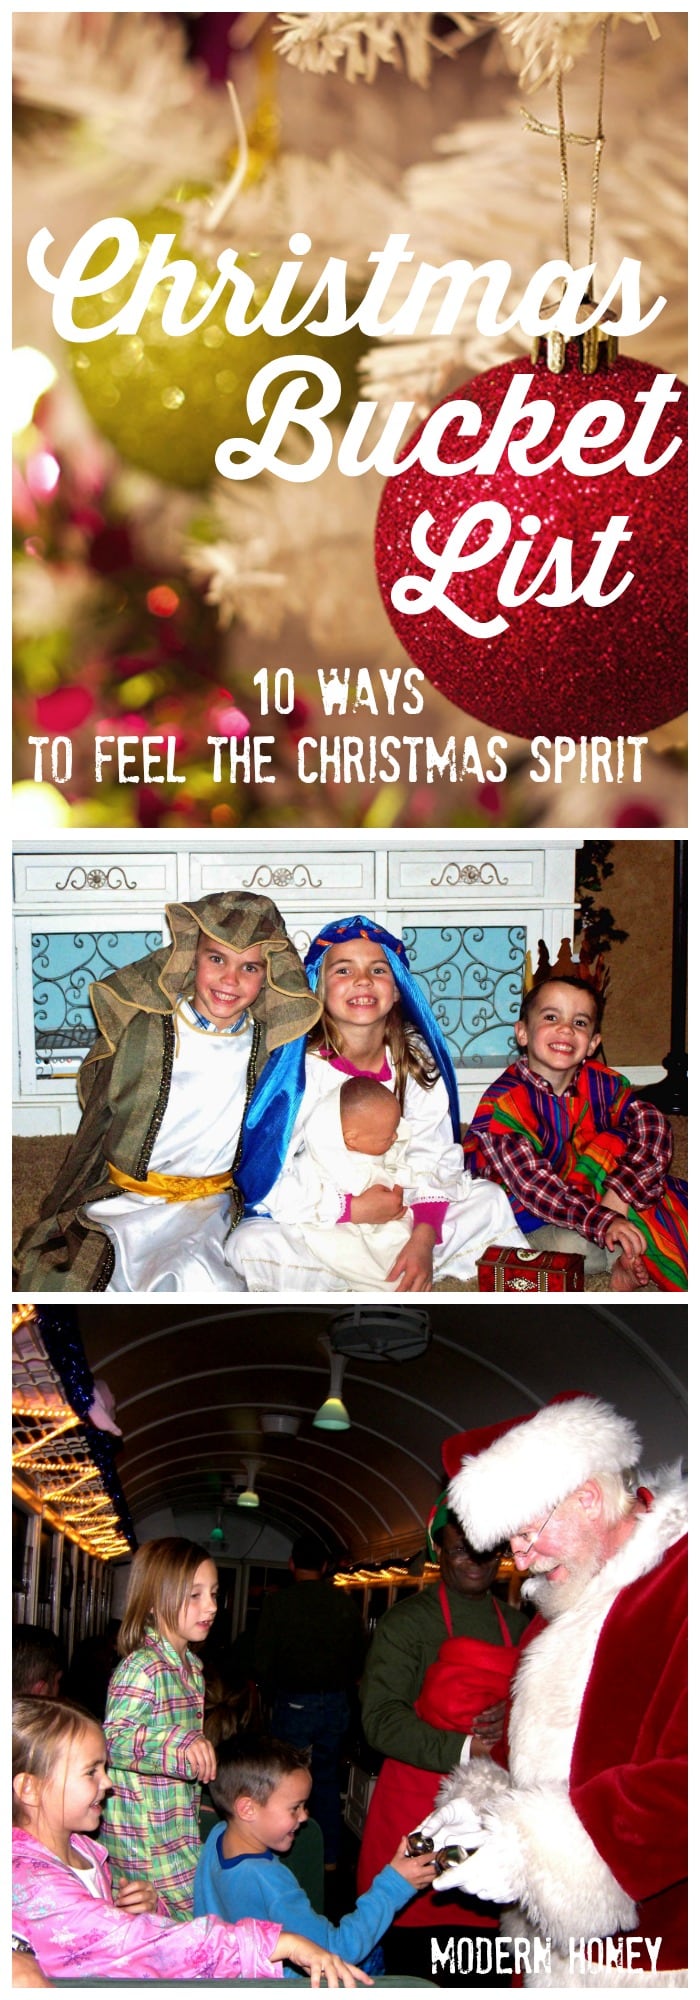 Christmas Bucket List. 10 Ways to Feel the Christmas Spirit. Ideas on how to make Christmas extra magical with kids and celebrate the true meaning of Christmas.